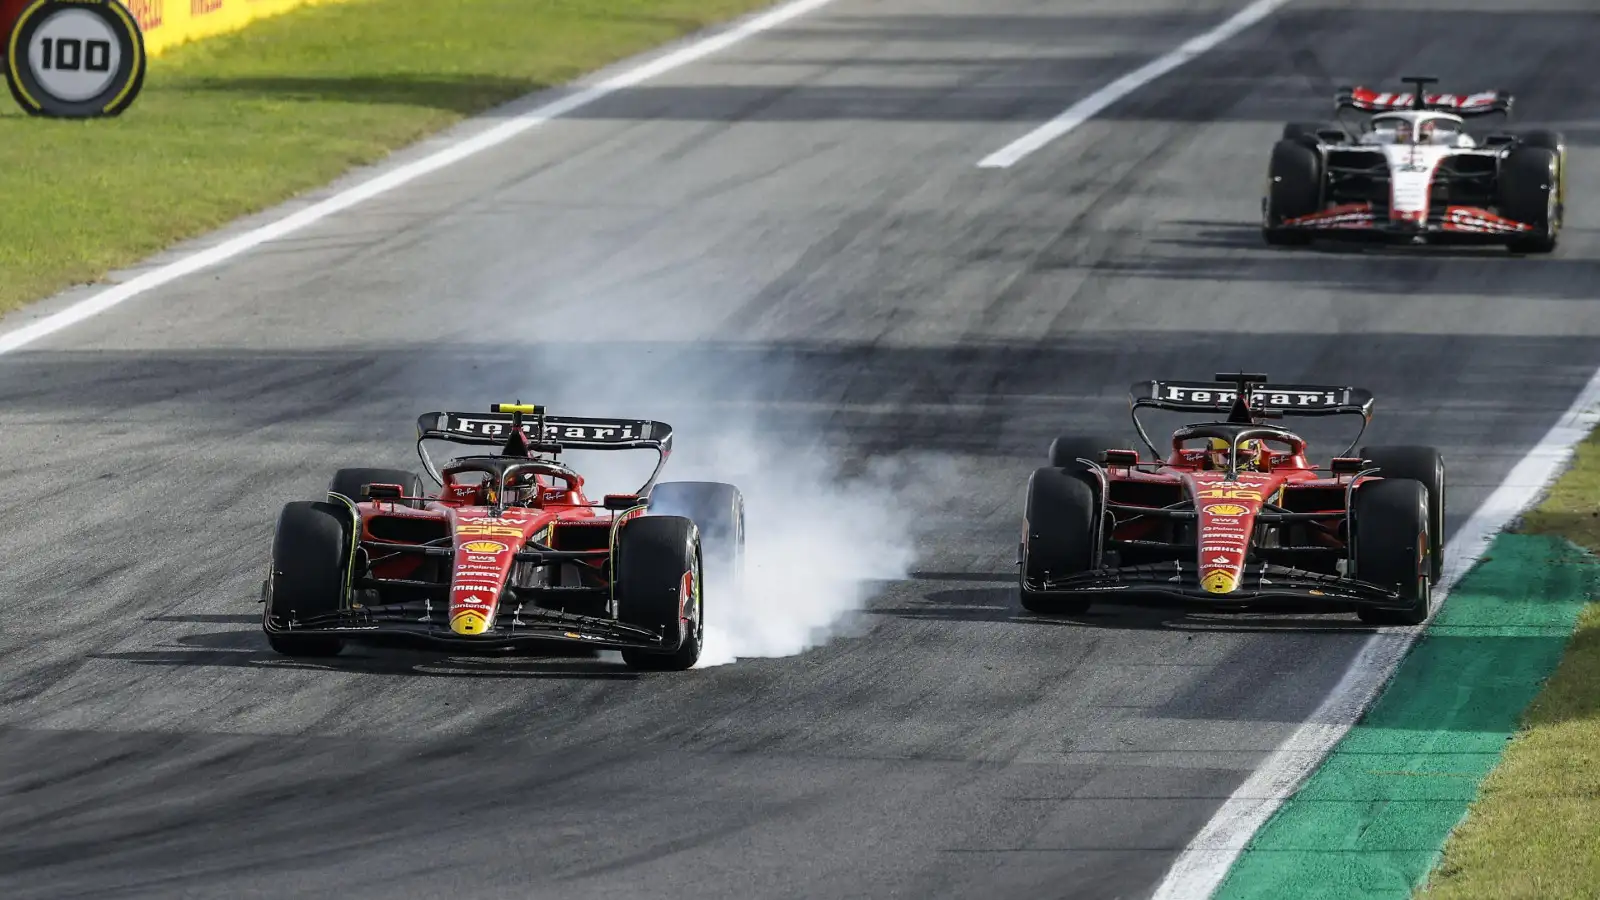 Monza: Ferrari drivers Charles Leclerc and Carlos Sainz do battle in the quest for the final podium place.